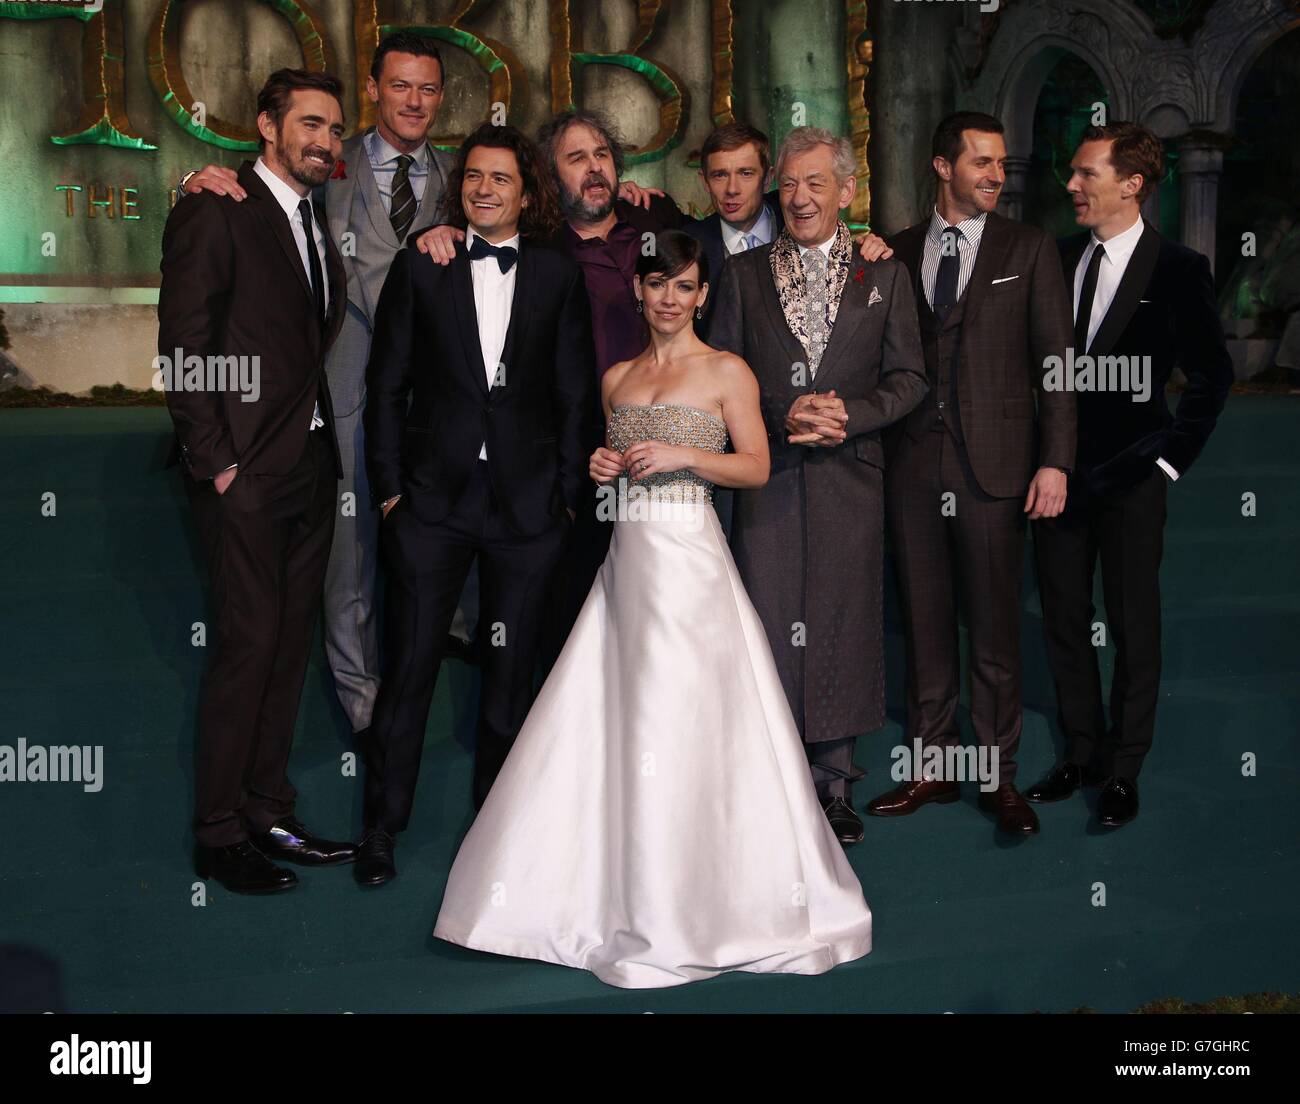 Cast members (left to right) Lee Pace, Luke Evans, Orlando Bloom, director Peter Jackson, Evangeline Lilly, Martin Freeman, Sir Ian McKellen, Richard Armitage, and Benedict Cumberbatch on the green carpet for the premiere of The Hobbit: Battle of the Five Armies, at the Odeon Leicester Square in central London. Stock Photo